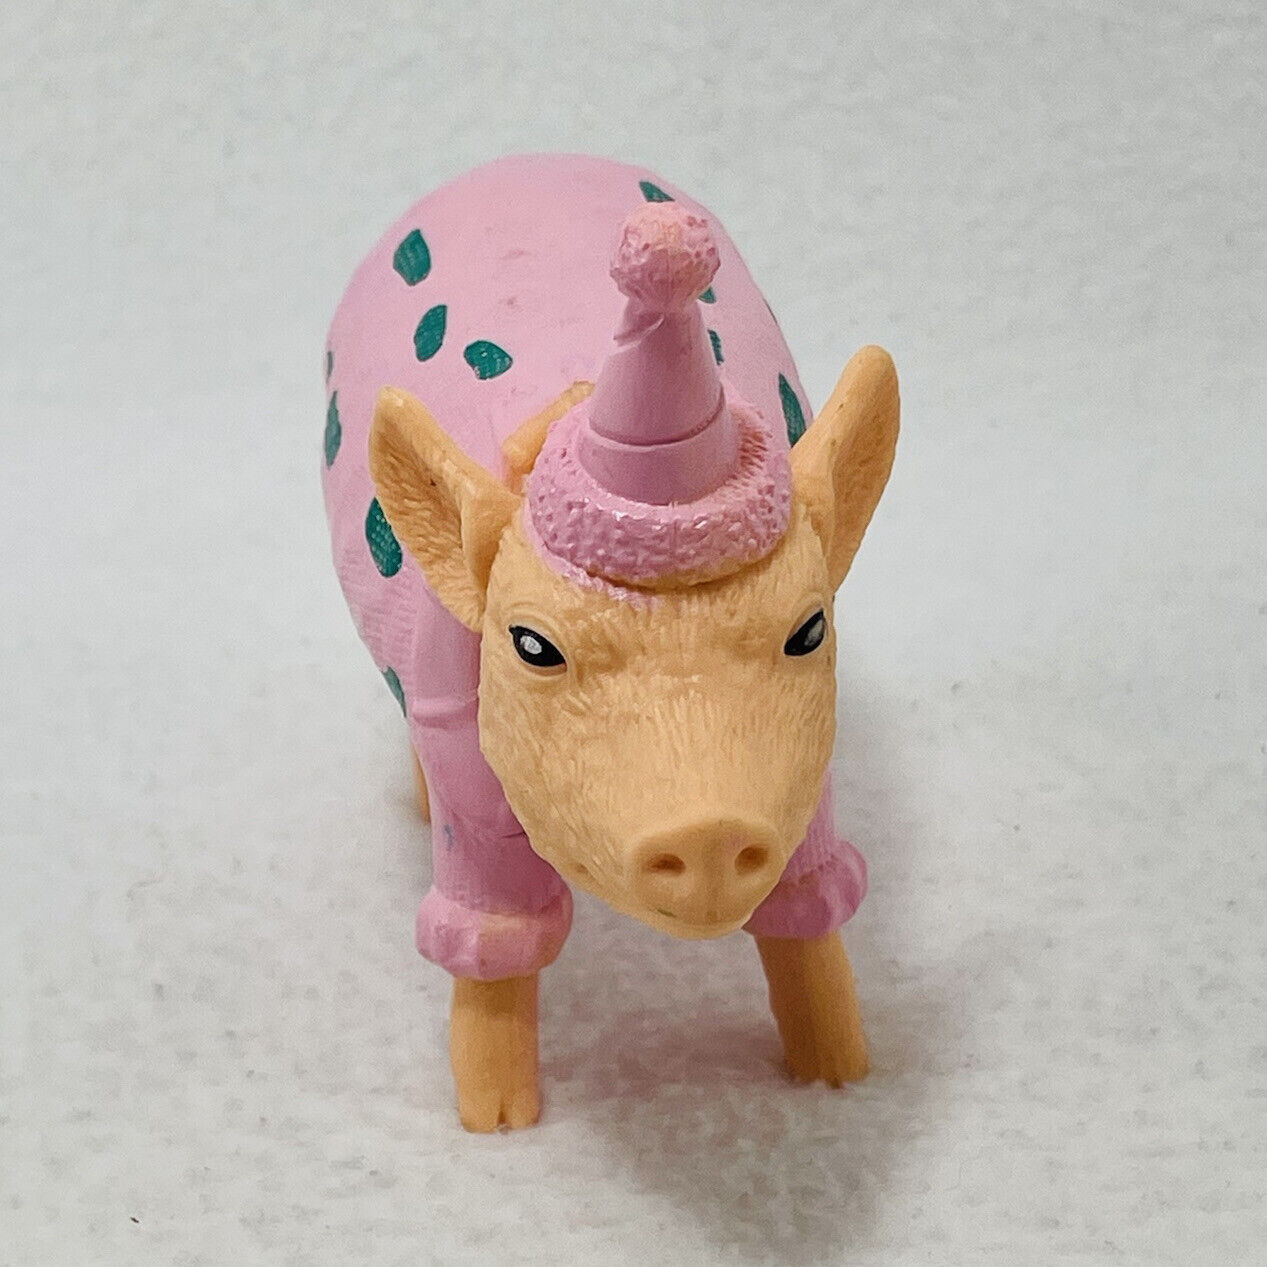 Pink Pig Birthday Girl Party Figure 5” Cake Topper Hat Gift Farm Animal Toy Mini